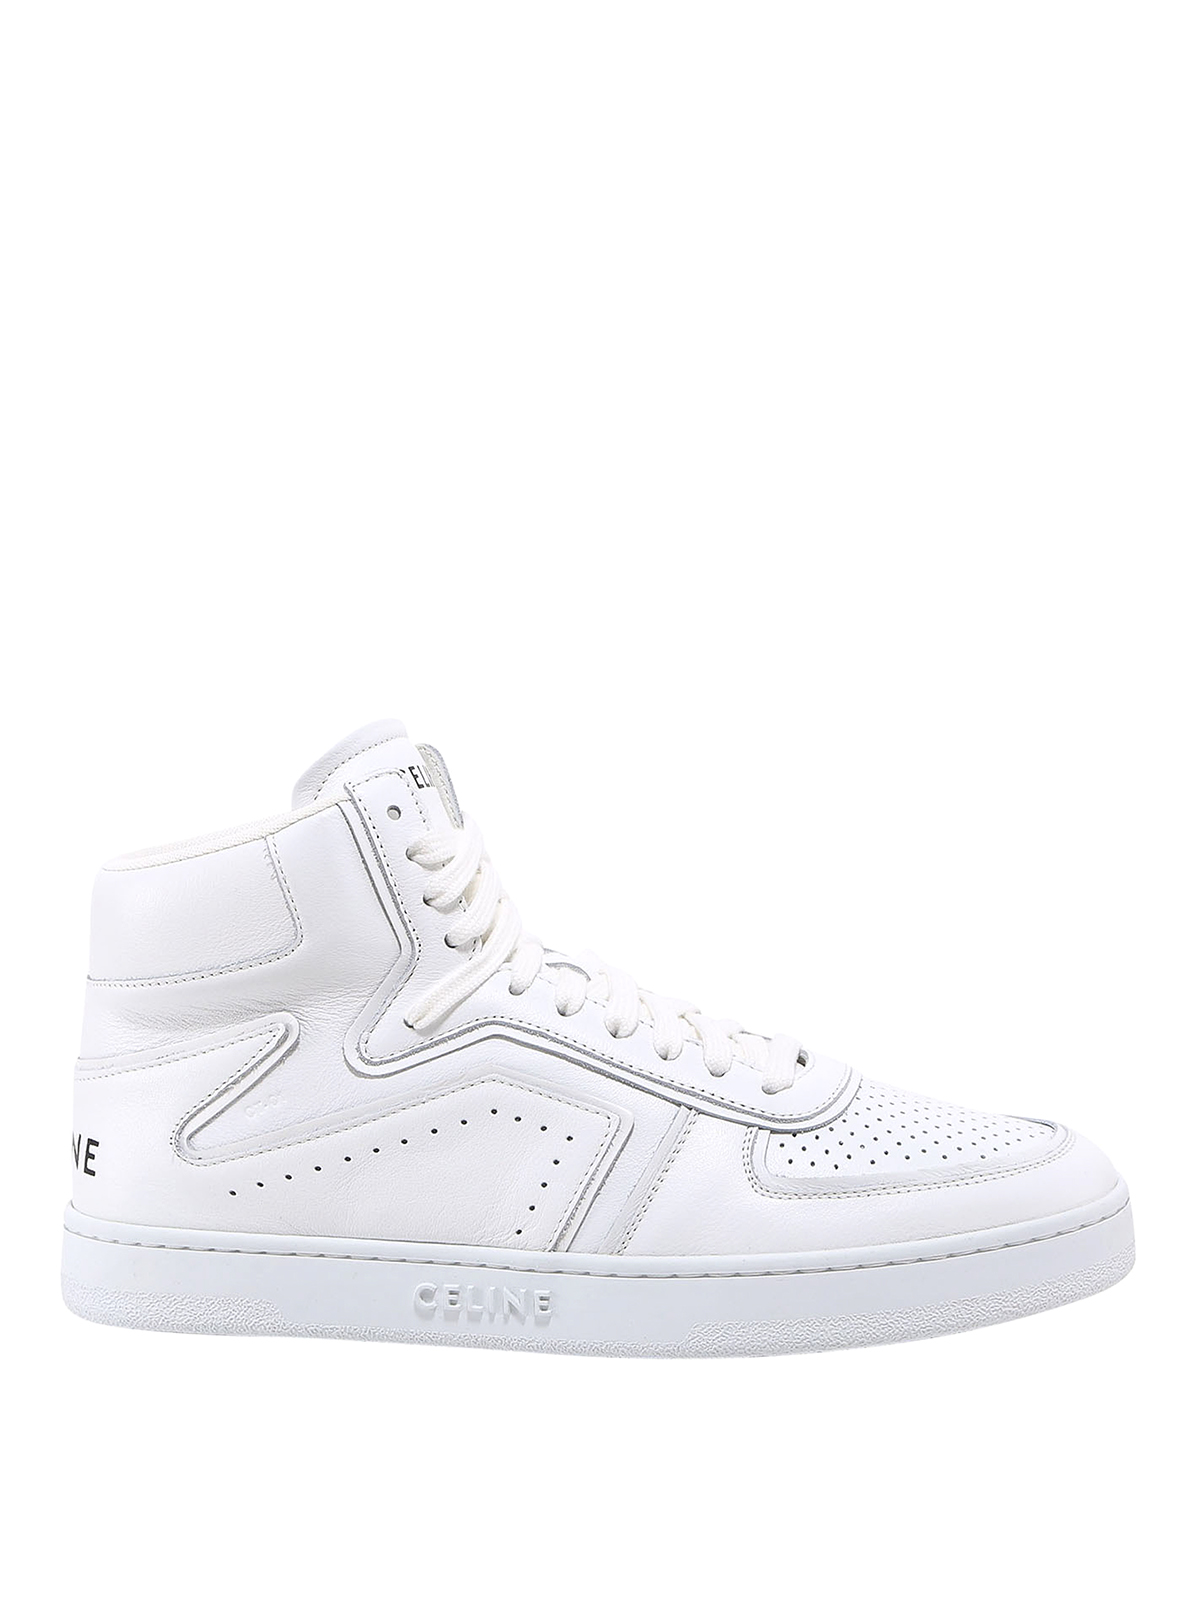 Celine White High Top Leather Sneakers | ModeSens